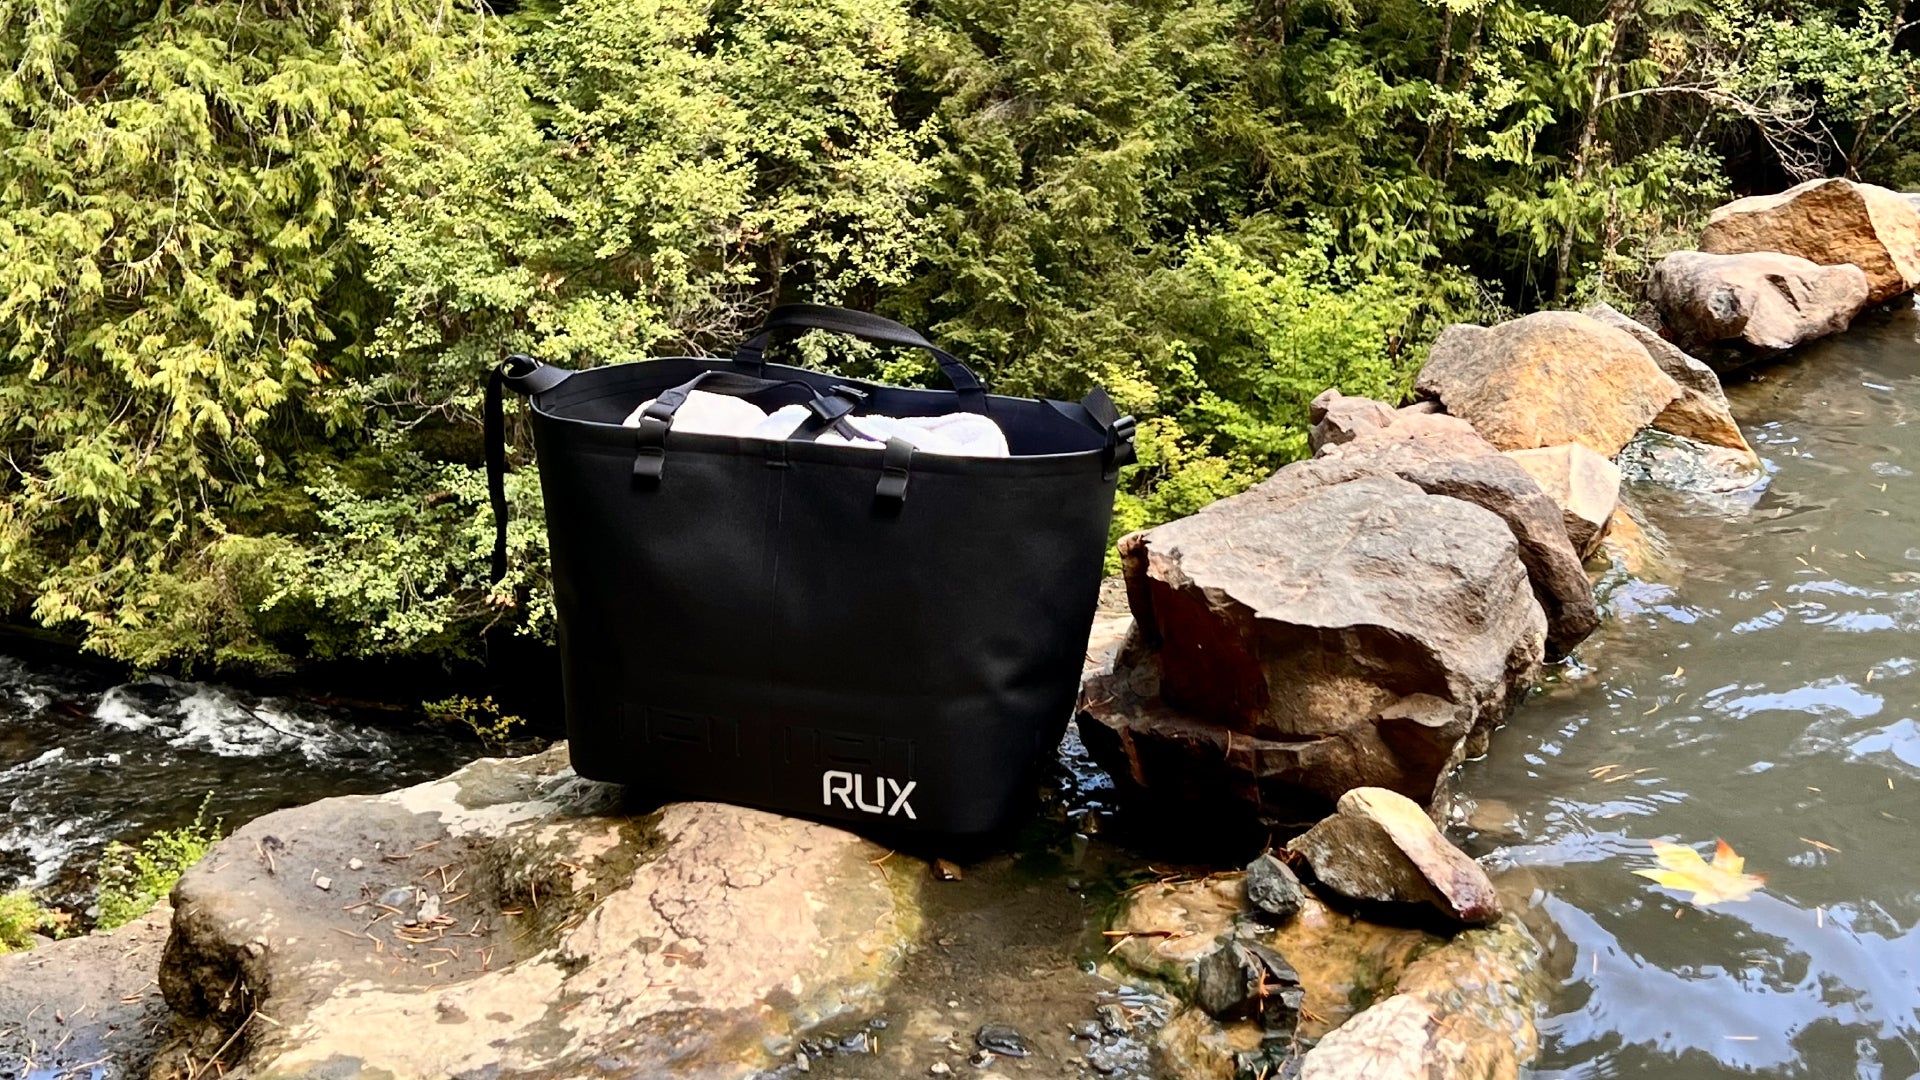 5 Reasons Why The RUX Waterproof Bag Is Your Hot Spring Adventure Essential